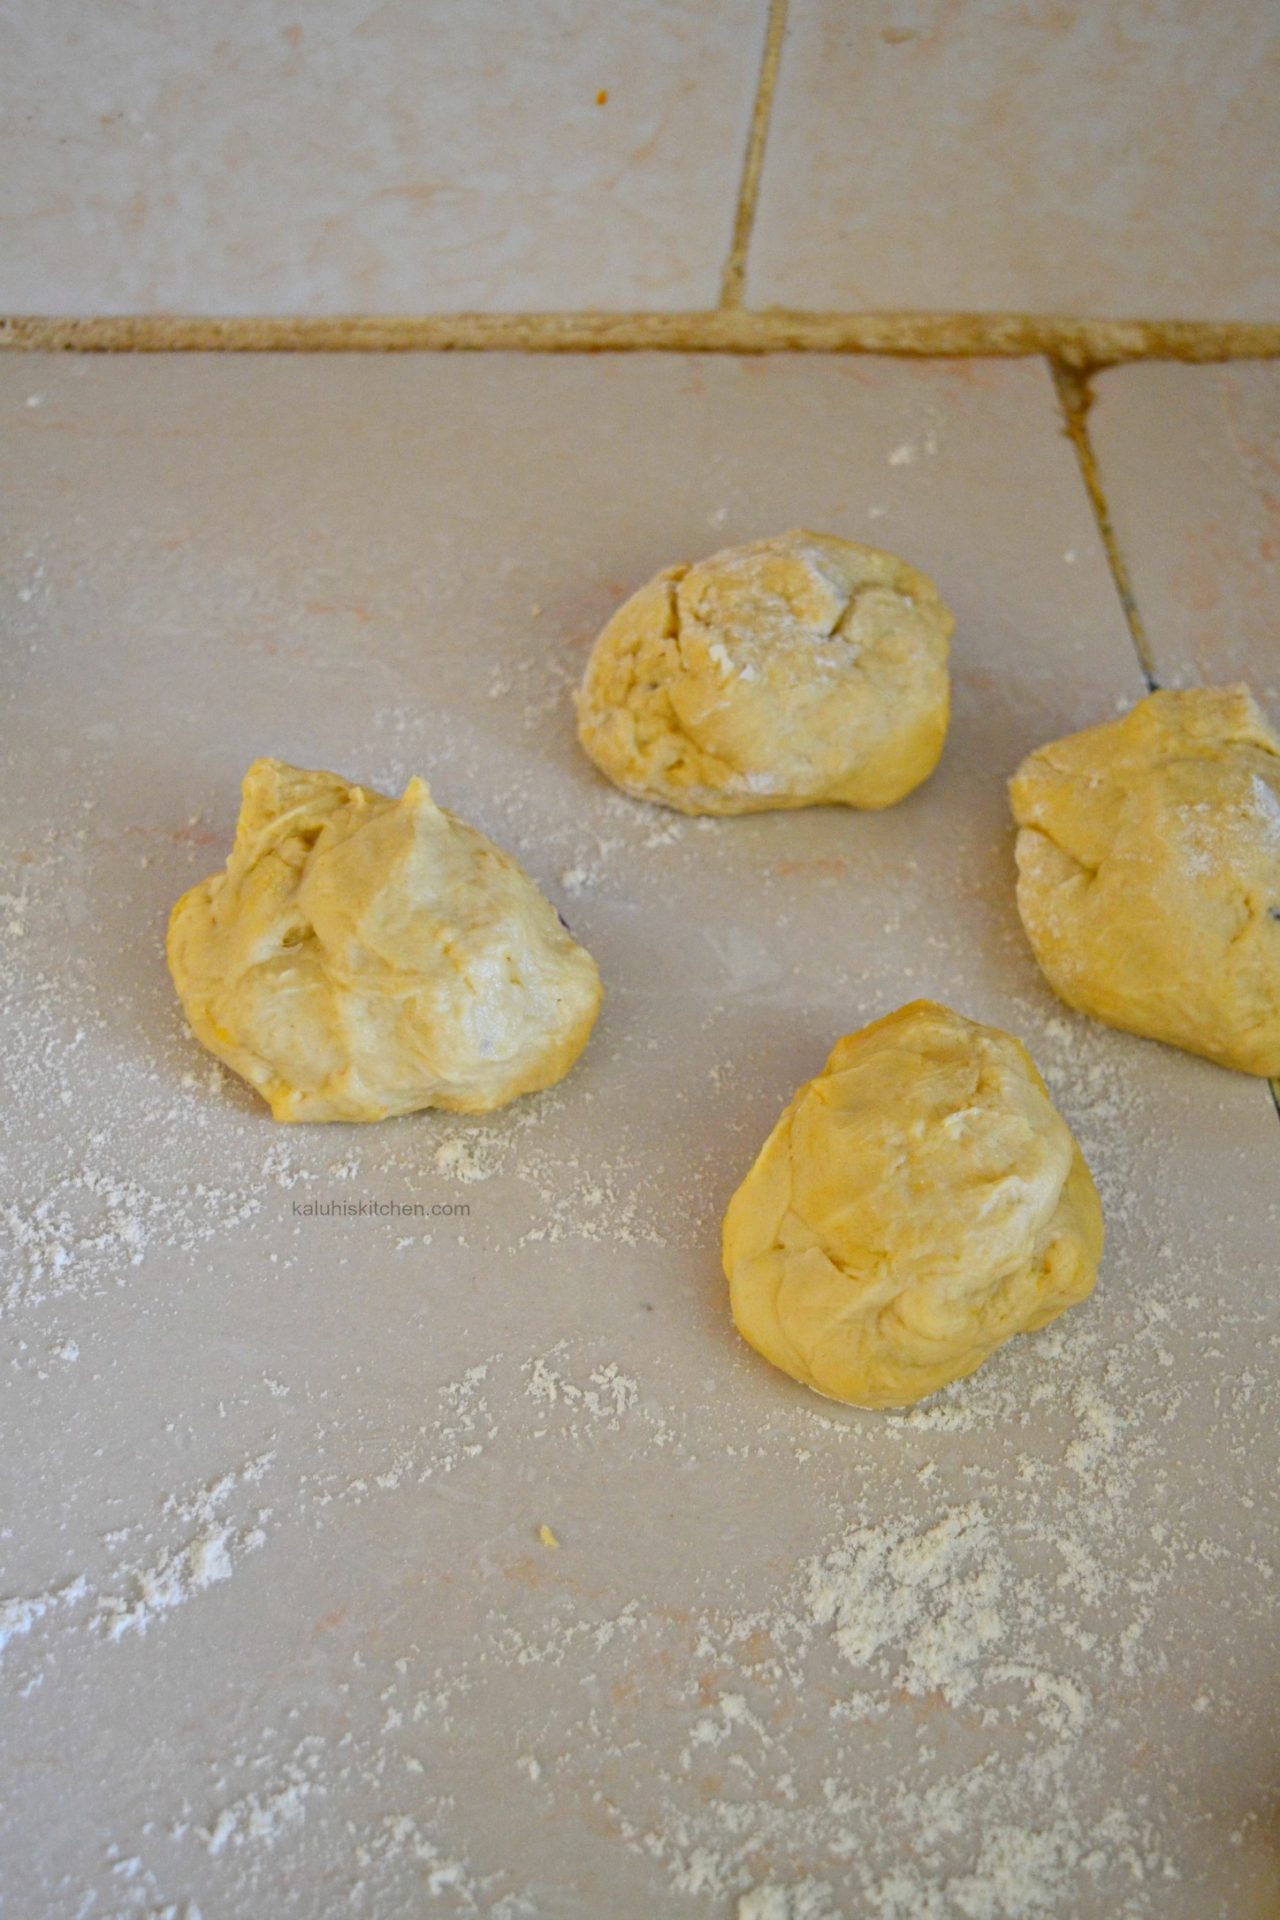 first step in rolling out your chapati dough is dividing the dough into tangerine-sized dough balls_how to make chapati_kenyan food recipes_kaluhiskitchen.com